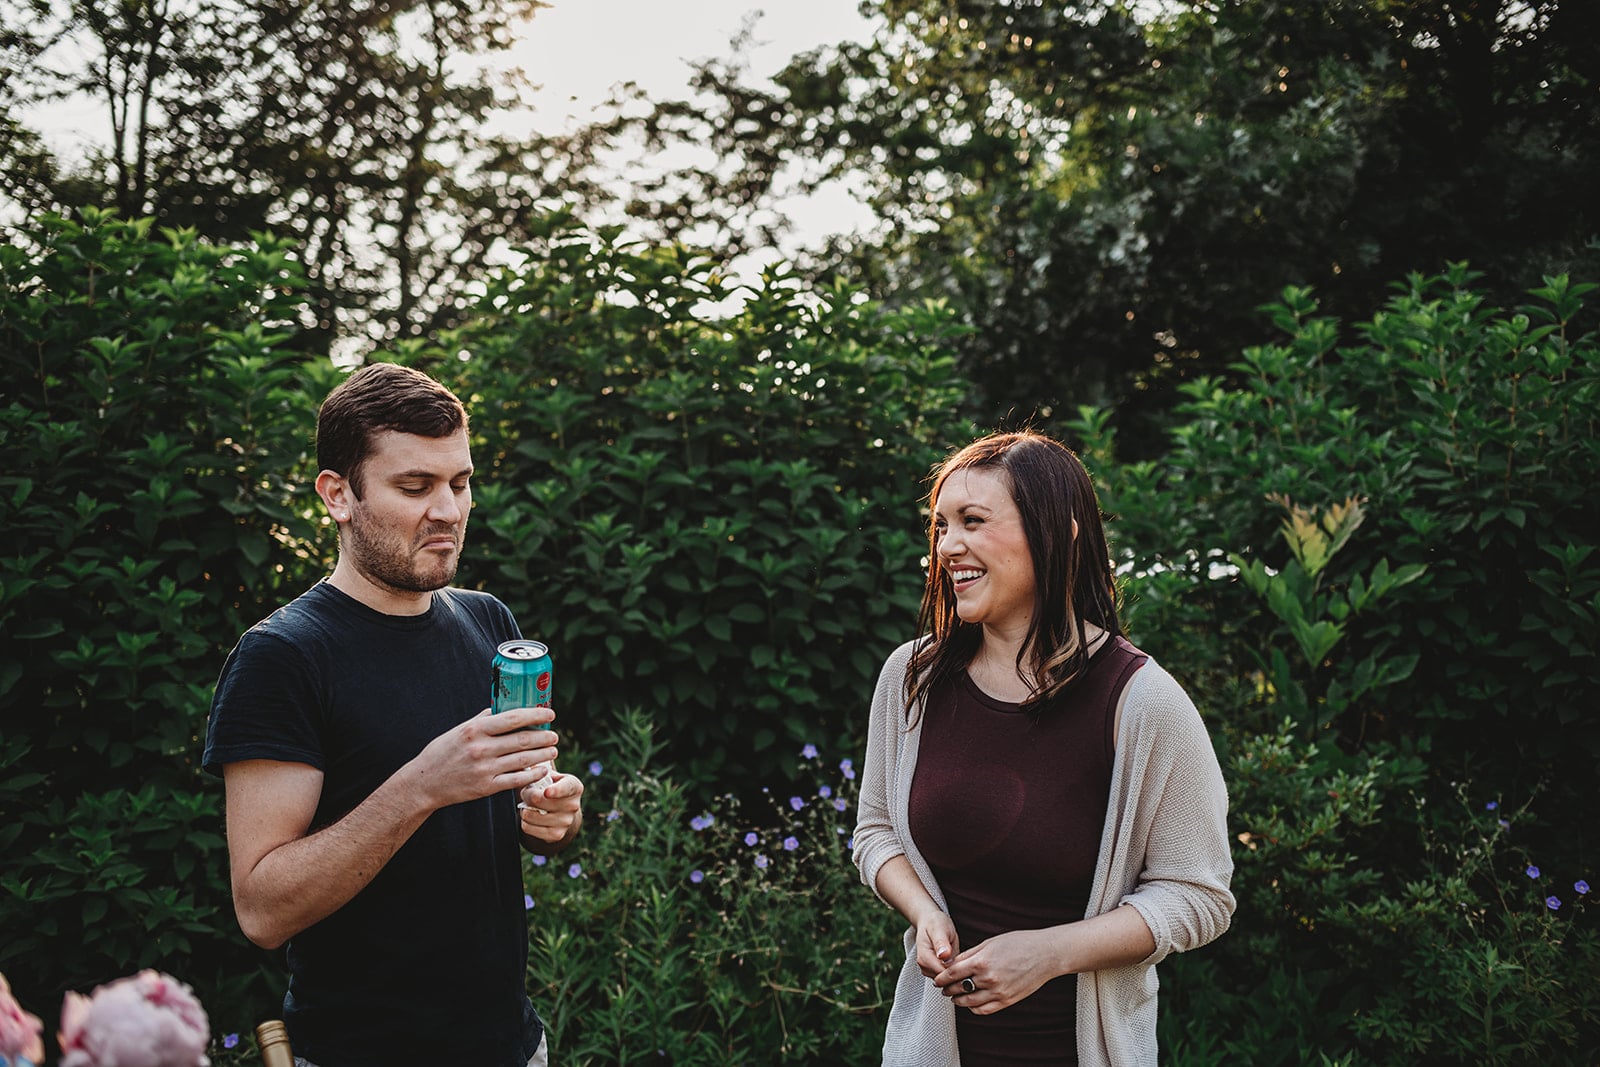 Shot of a woman and a man laughing in a garden